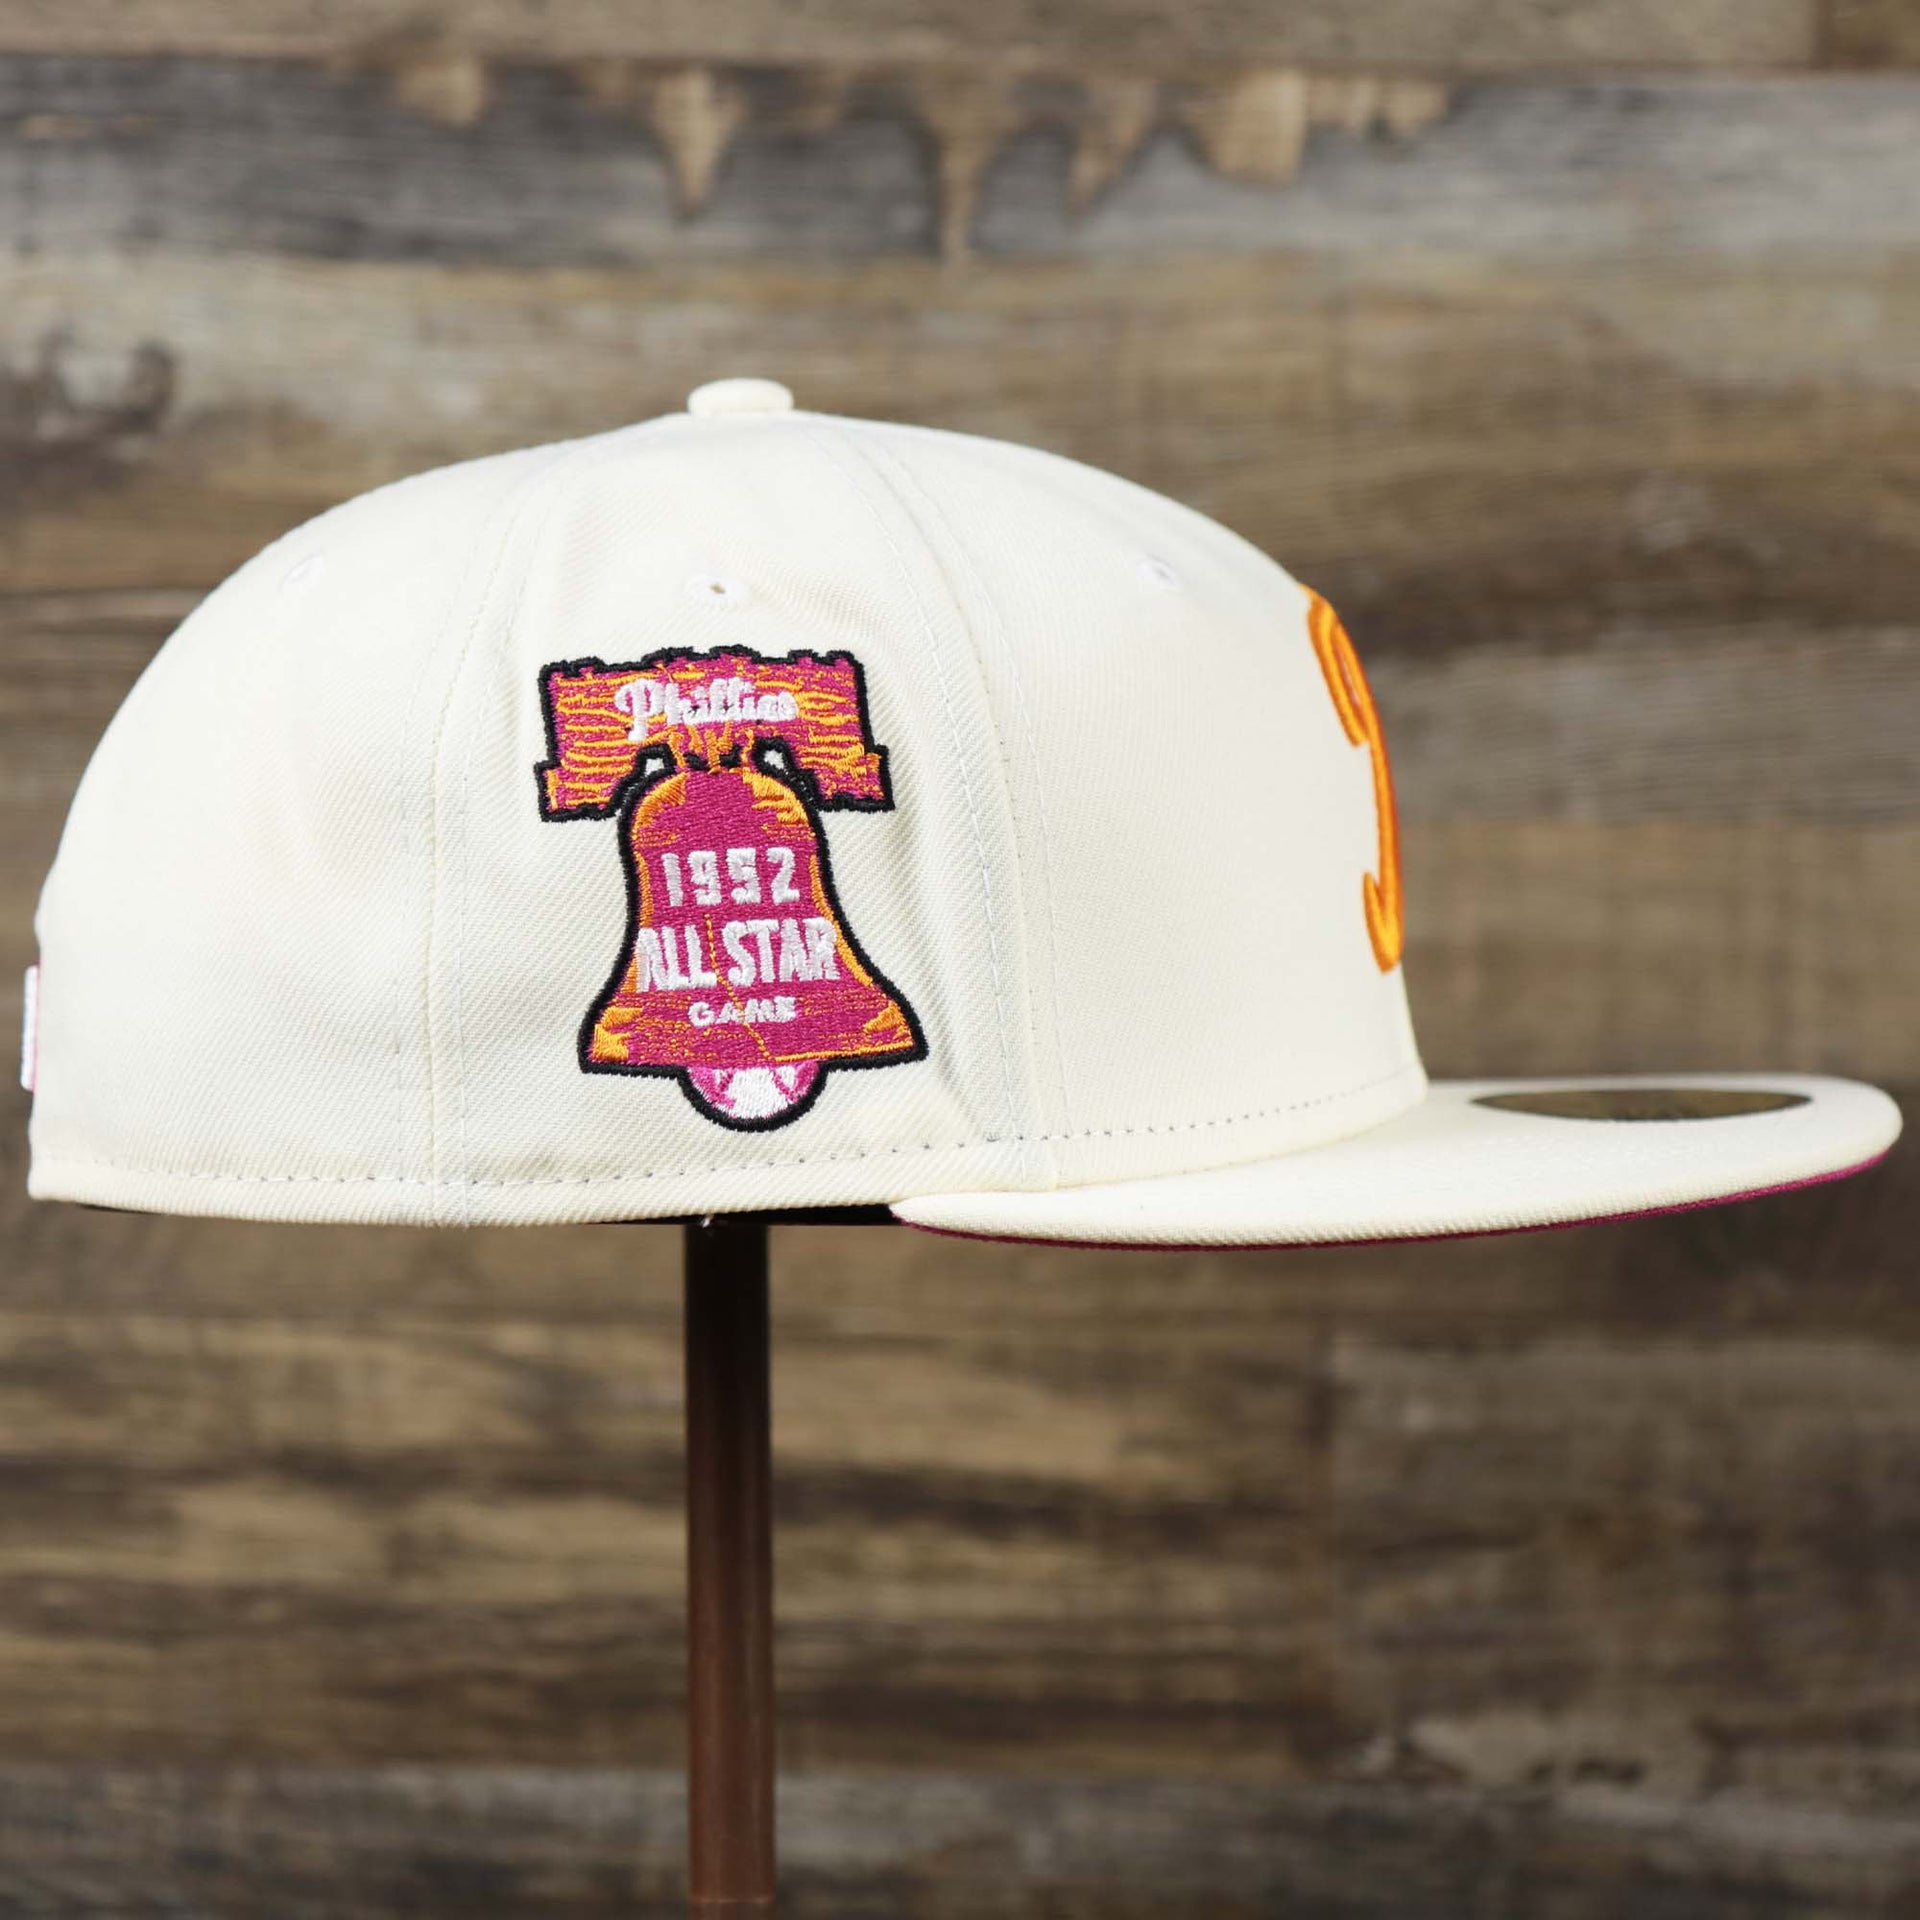 The wearer's right on the Cooperstown Philadelphia Phillies Coffee Shop 1952 All Star Game Liberty Bell Side Patch 59Fifty Fitted Cap | New Era Off White 59Fifty